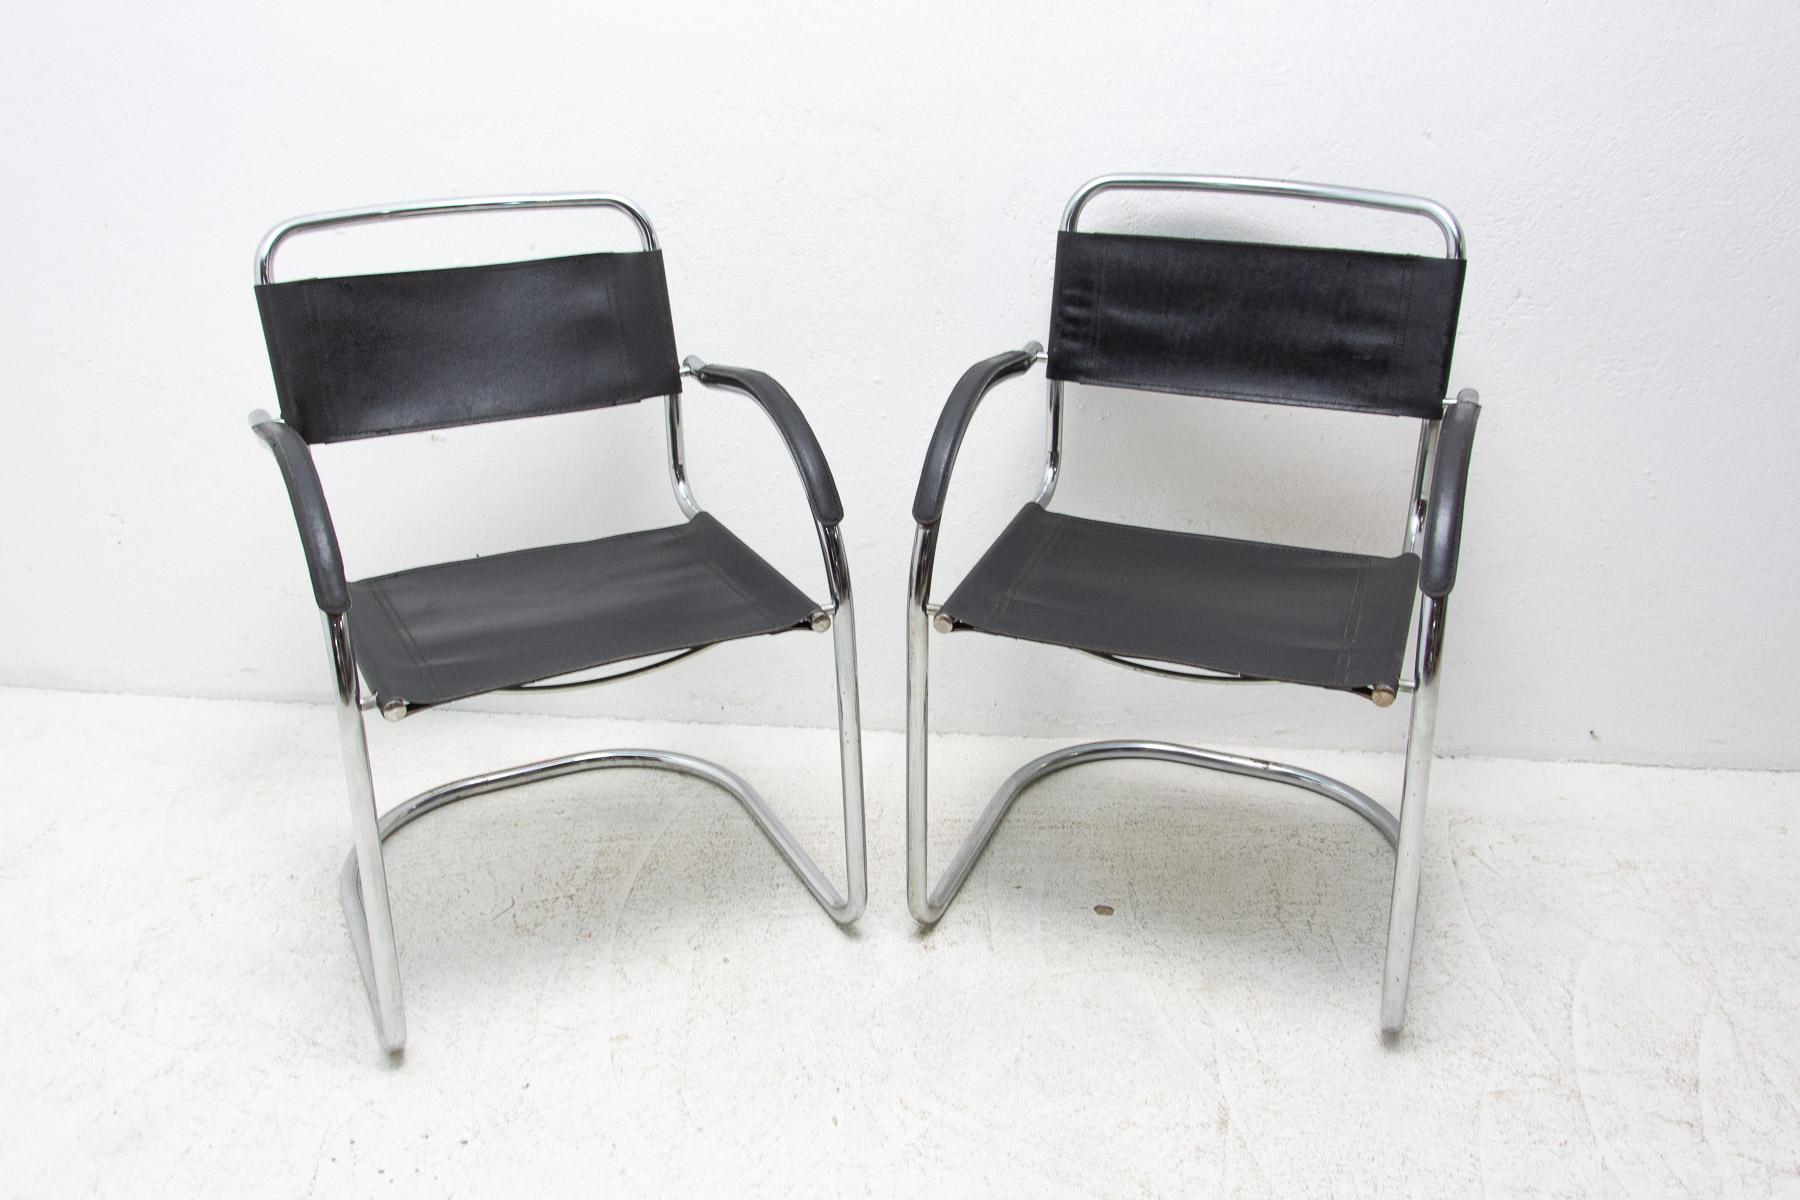 Bauhaus Pair of Cantilever Tubular Steel Armchairs, 1970's, Europe For Sale